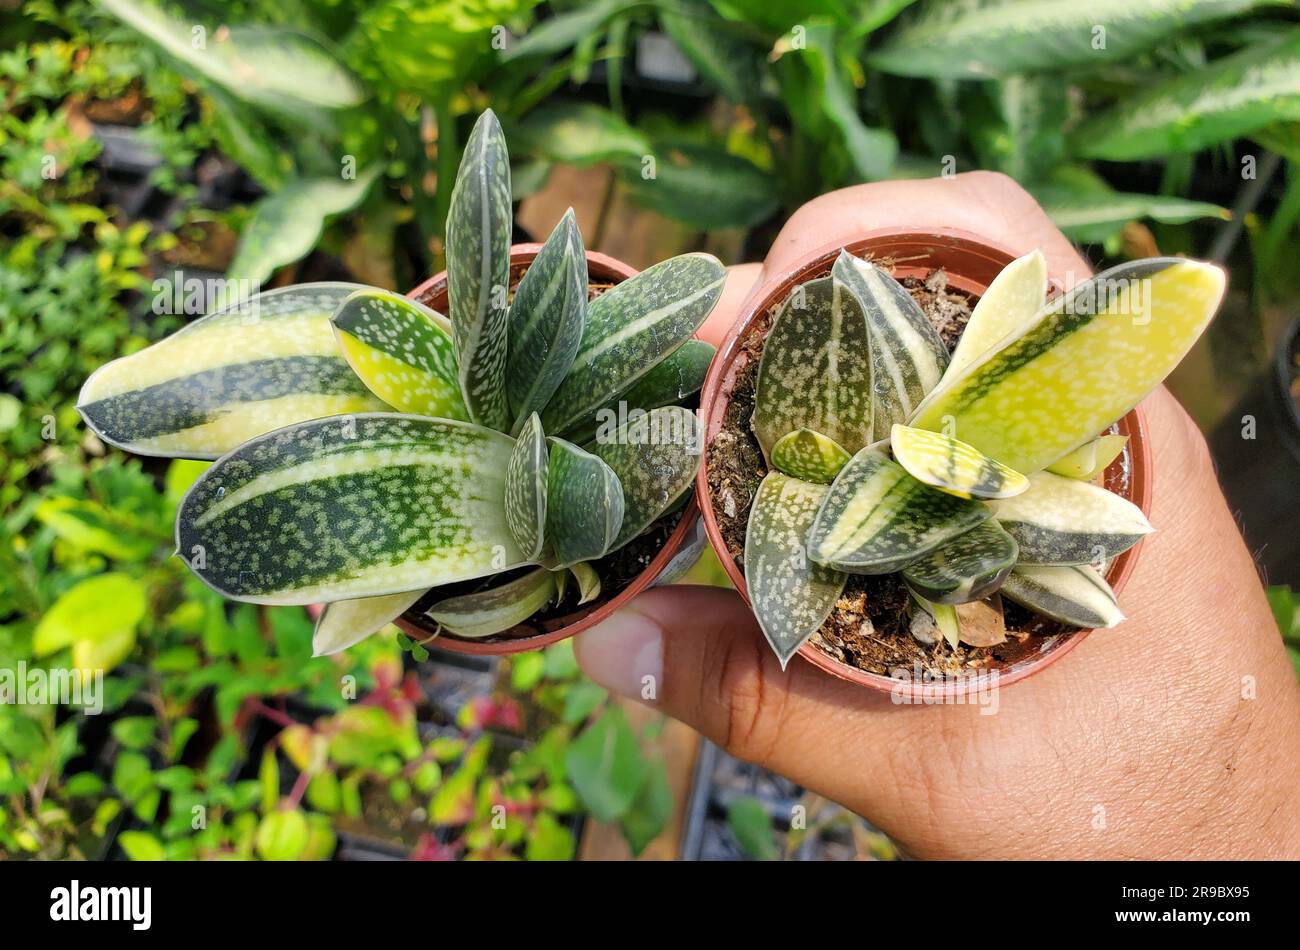 Holding the variegated white and green Ox Tongue Gasteria Glomerata plant Stock Photo